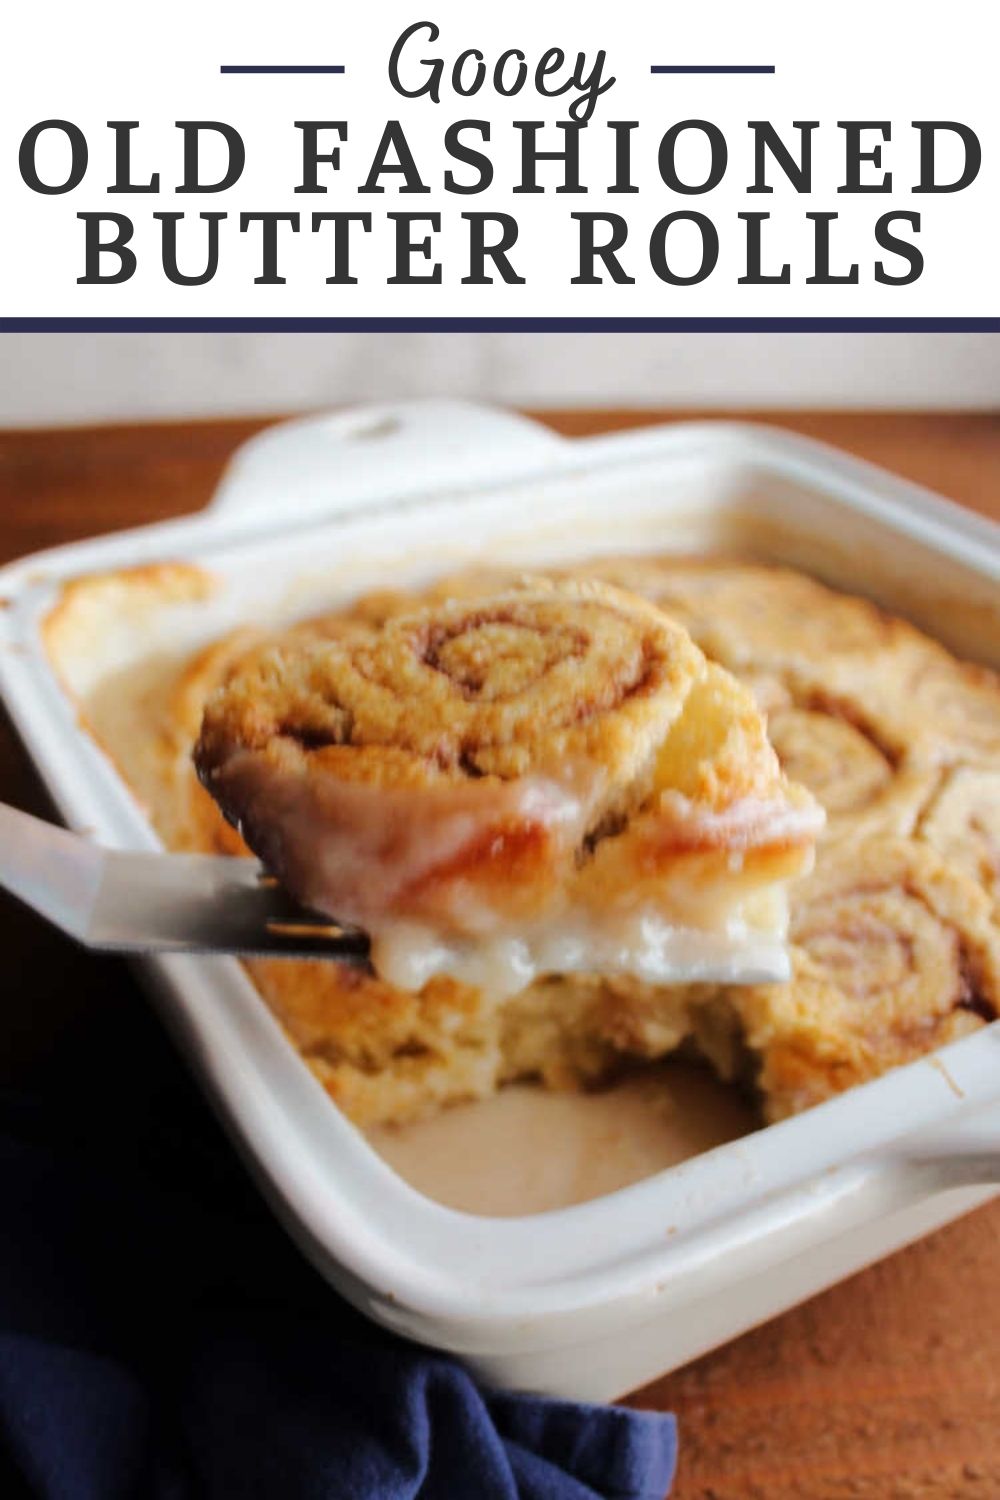 This yummy breakfast recipe is part biscuit like cinnamon rolls and part self saucing pudding cake. It has a gooey sauce that acts almost like a frosting that forms under the rolls. Enjoy them hot for the best breakfast experience.